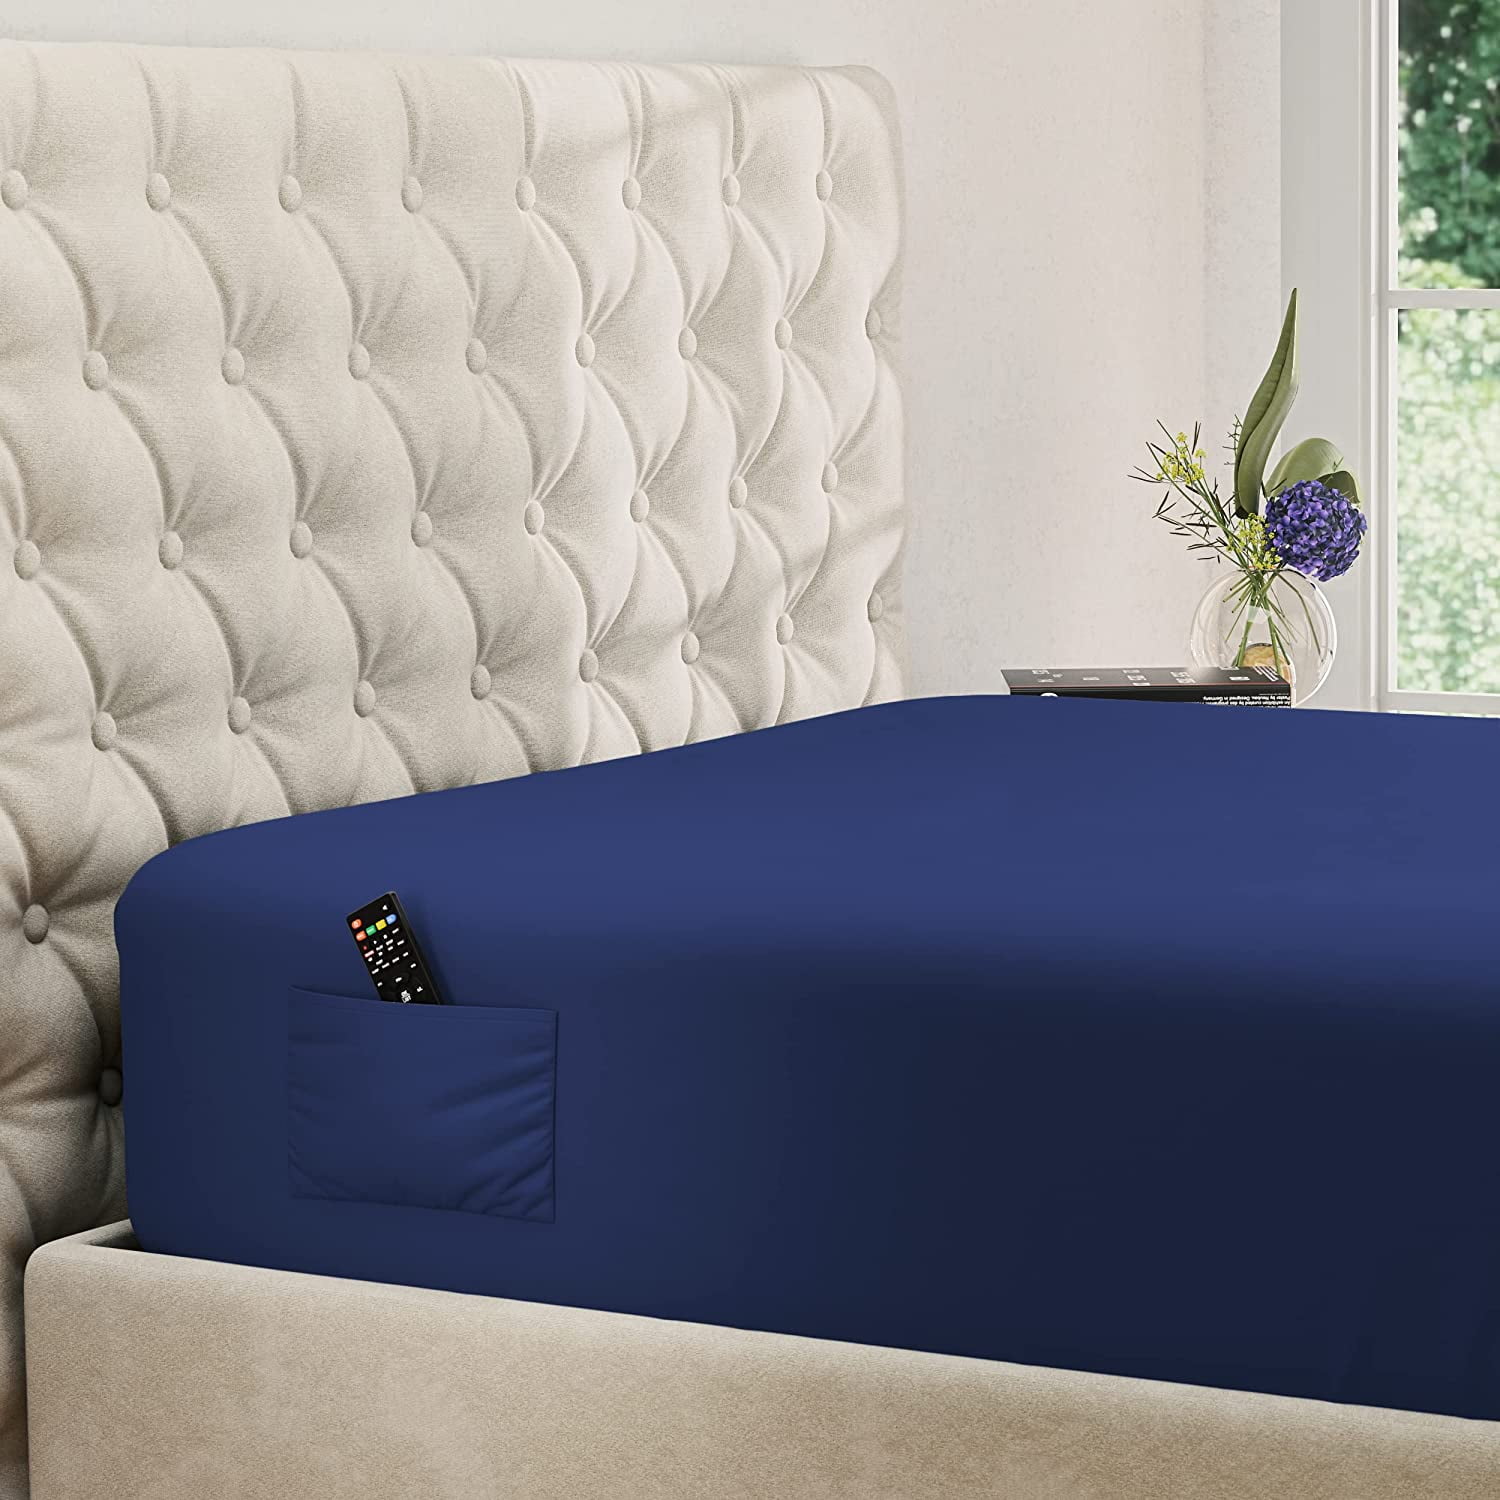 DREAMCARE - Bed Sheets - King Size Fitted Sheet 15 inches with Side Pocket,  Navy Blue 